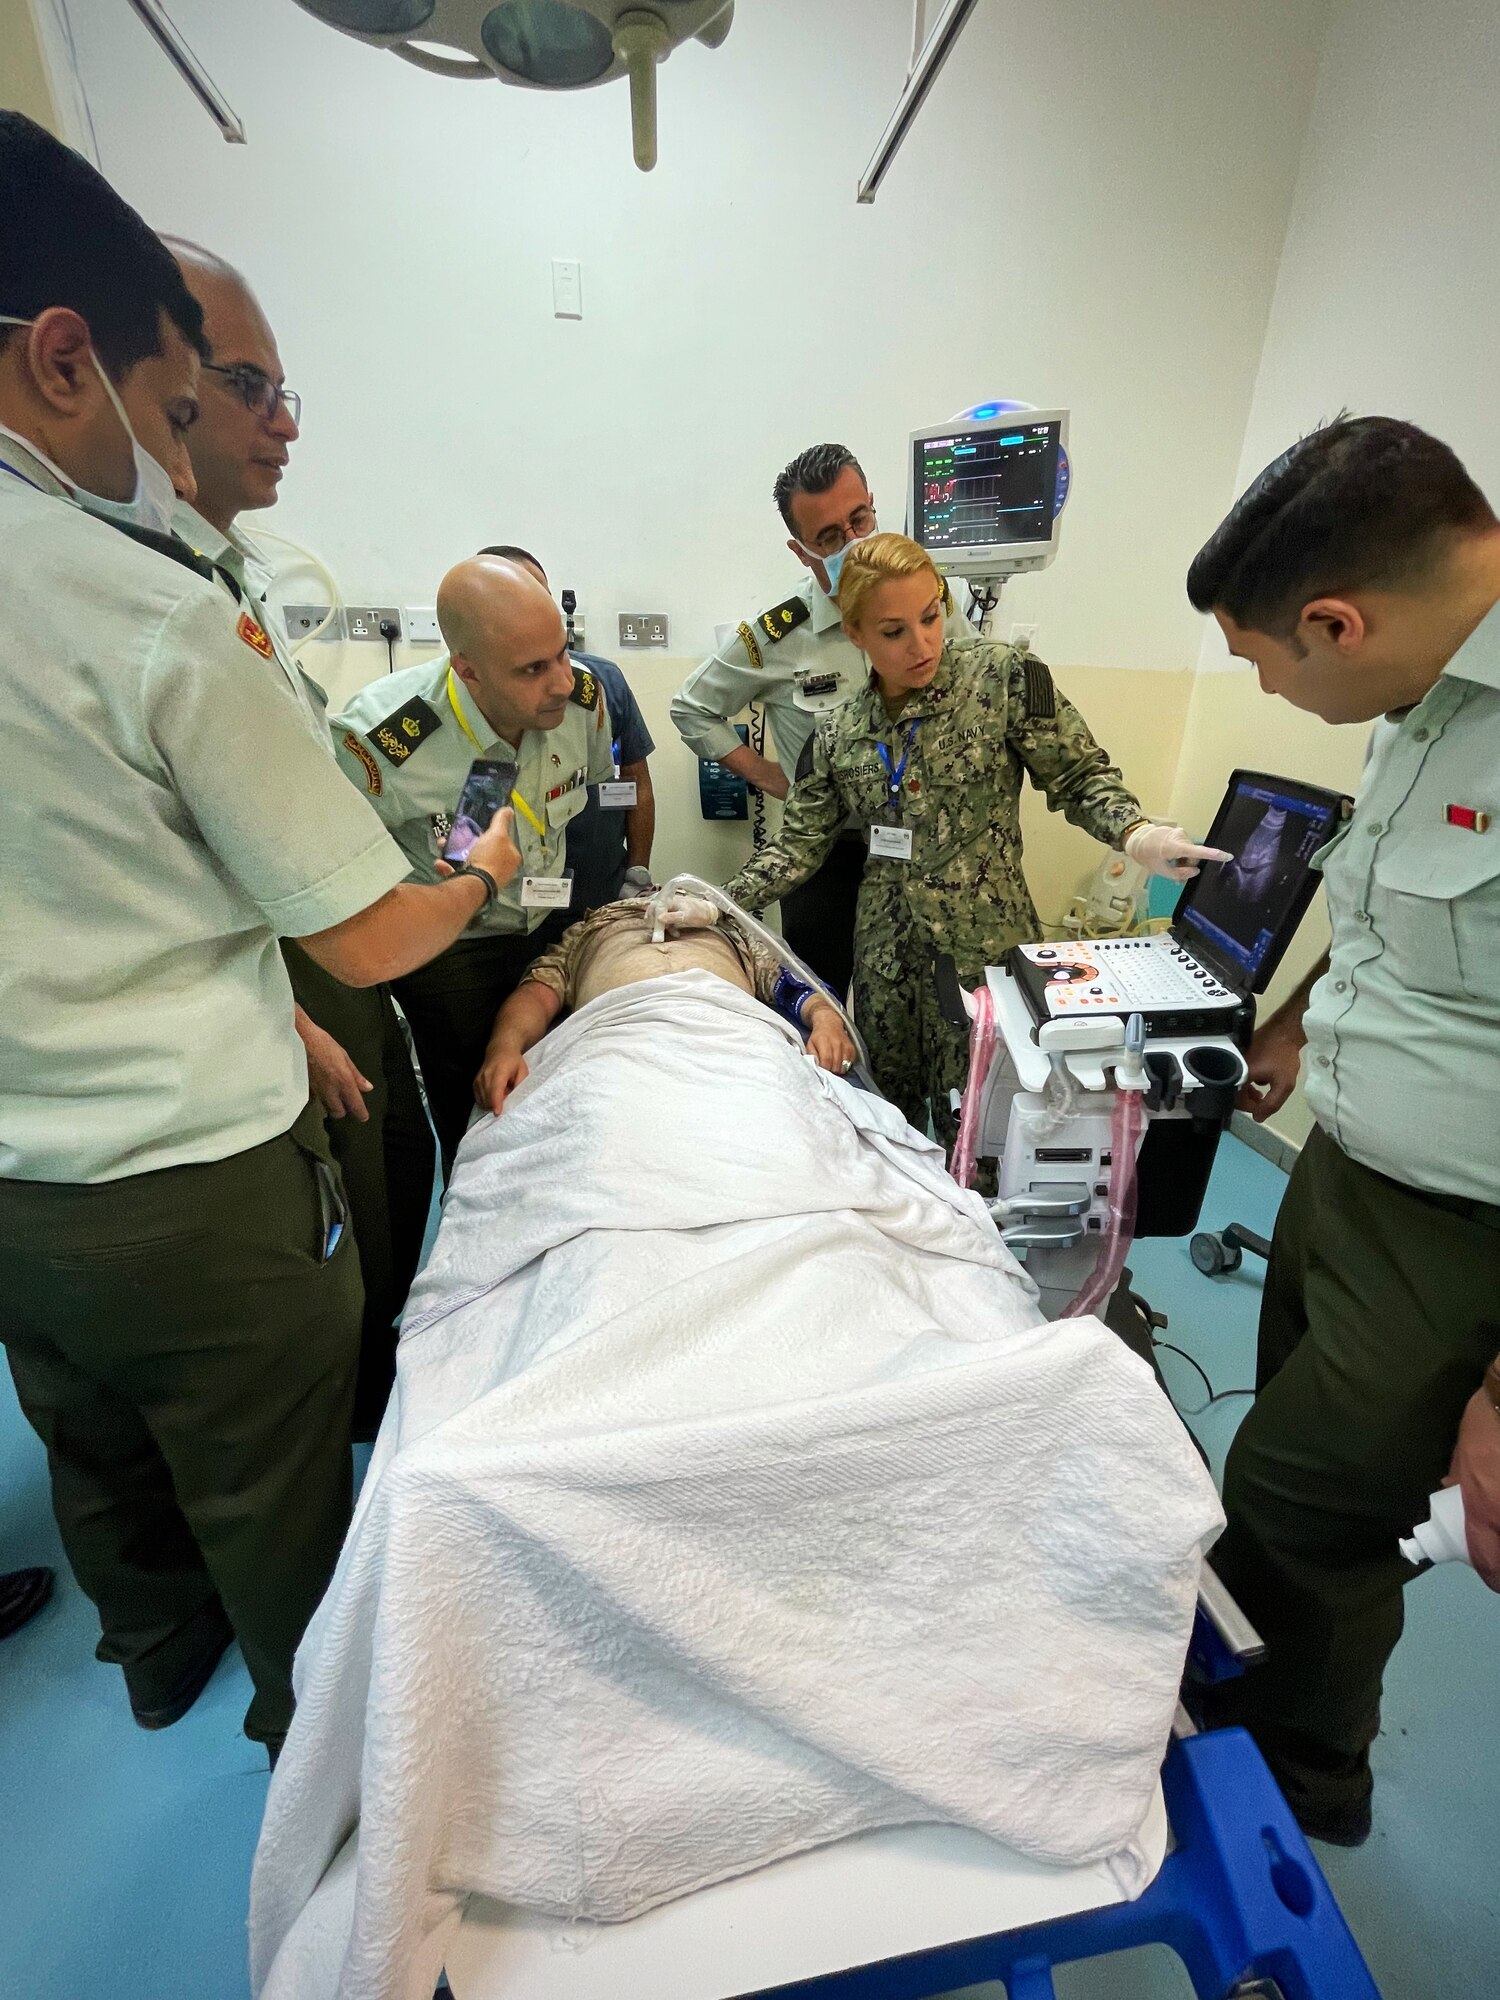 Lt. Cmdr. Taylor DesRosiers, Walter Reed Medical Center critical care fellow, points to a structure on an ultrasound machine screen while providing a demonstration of various techniques on a volunteer inside the King Hussein Medical Center May 9, 2022 in Amman, Jordan.